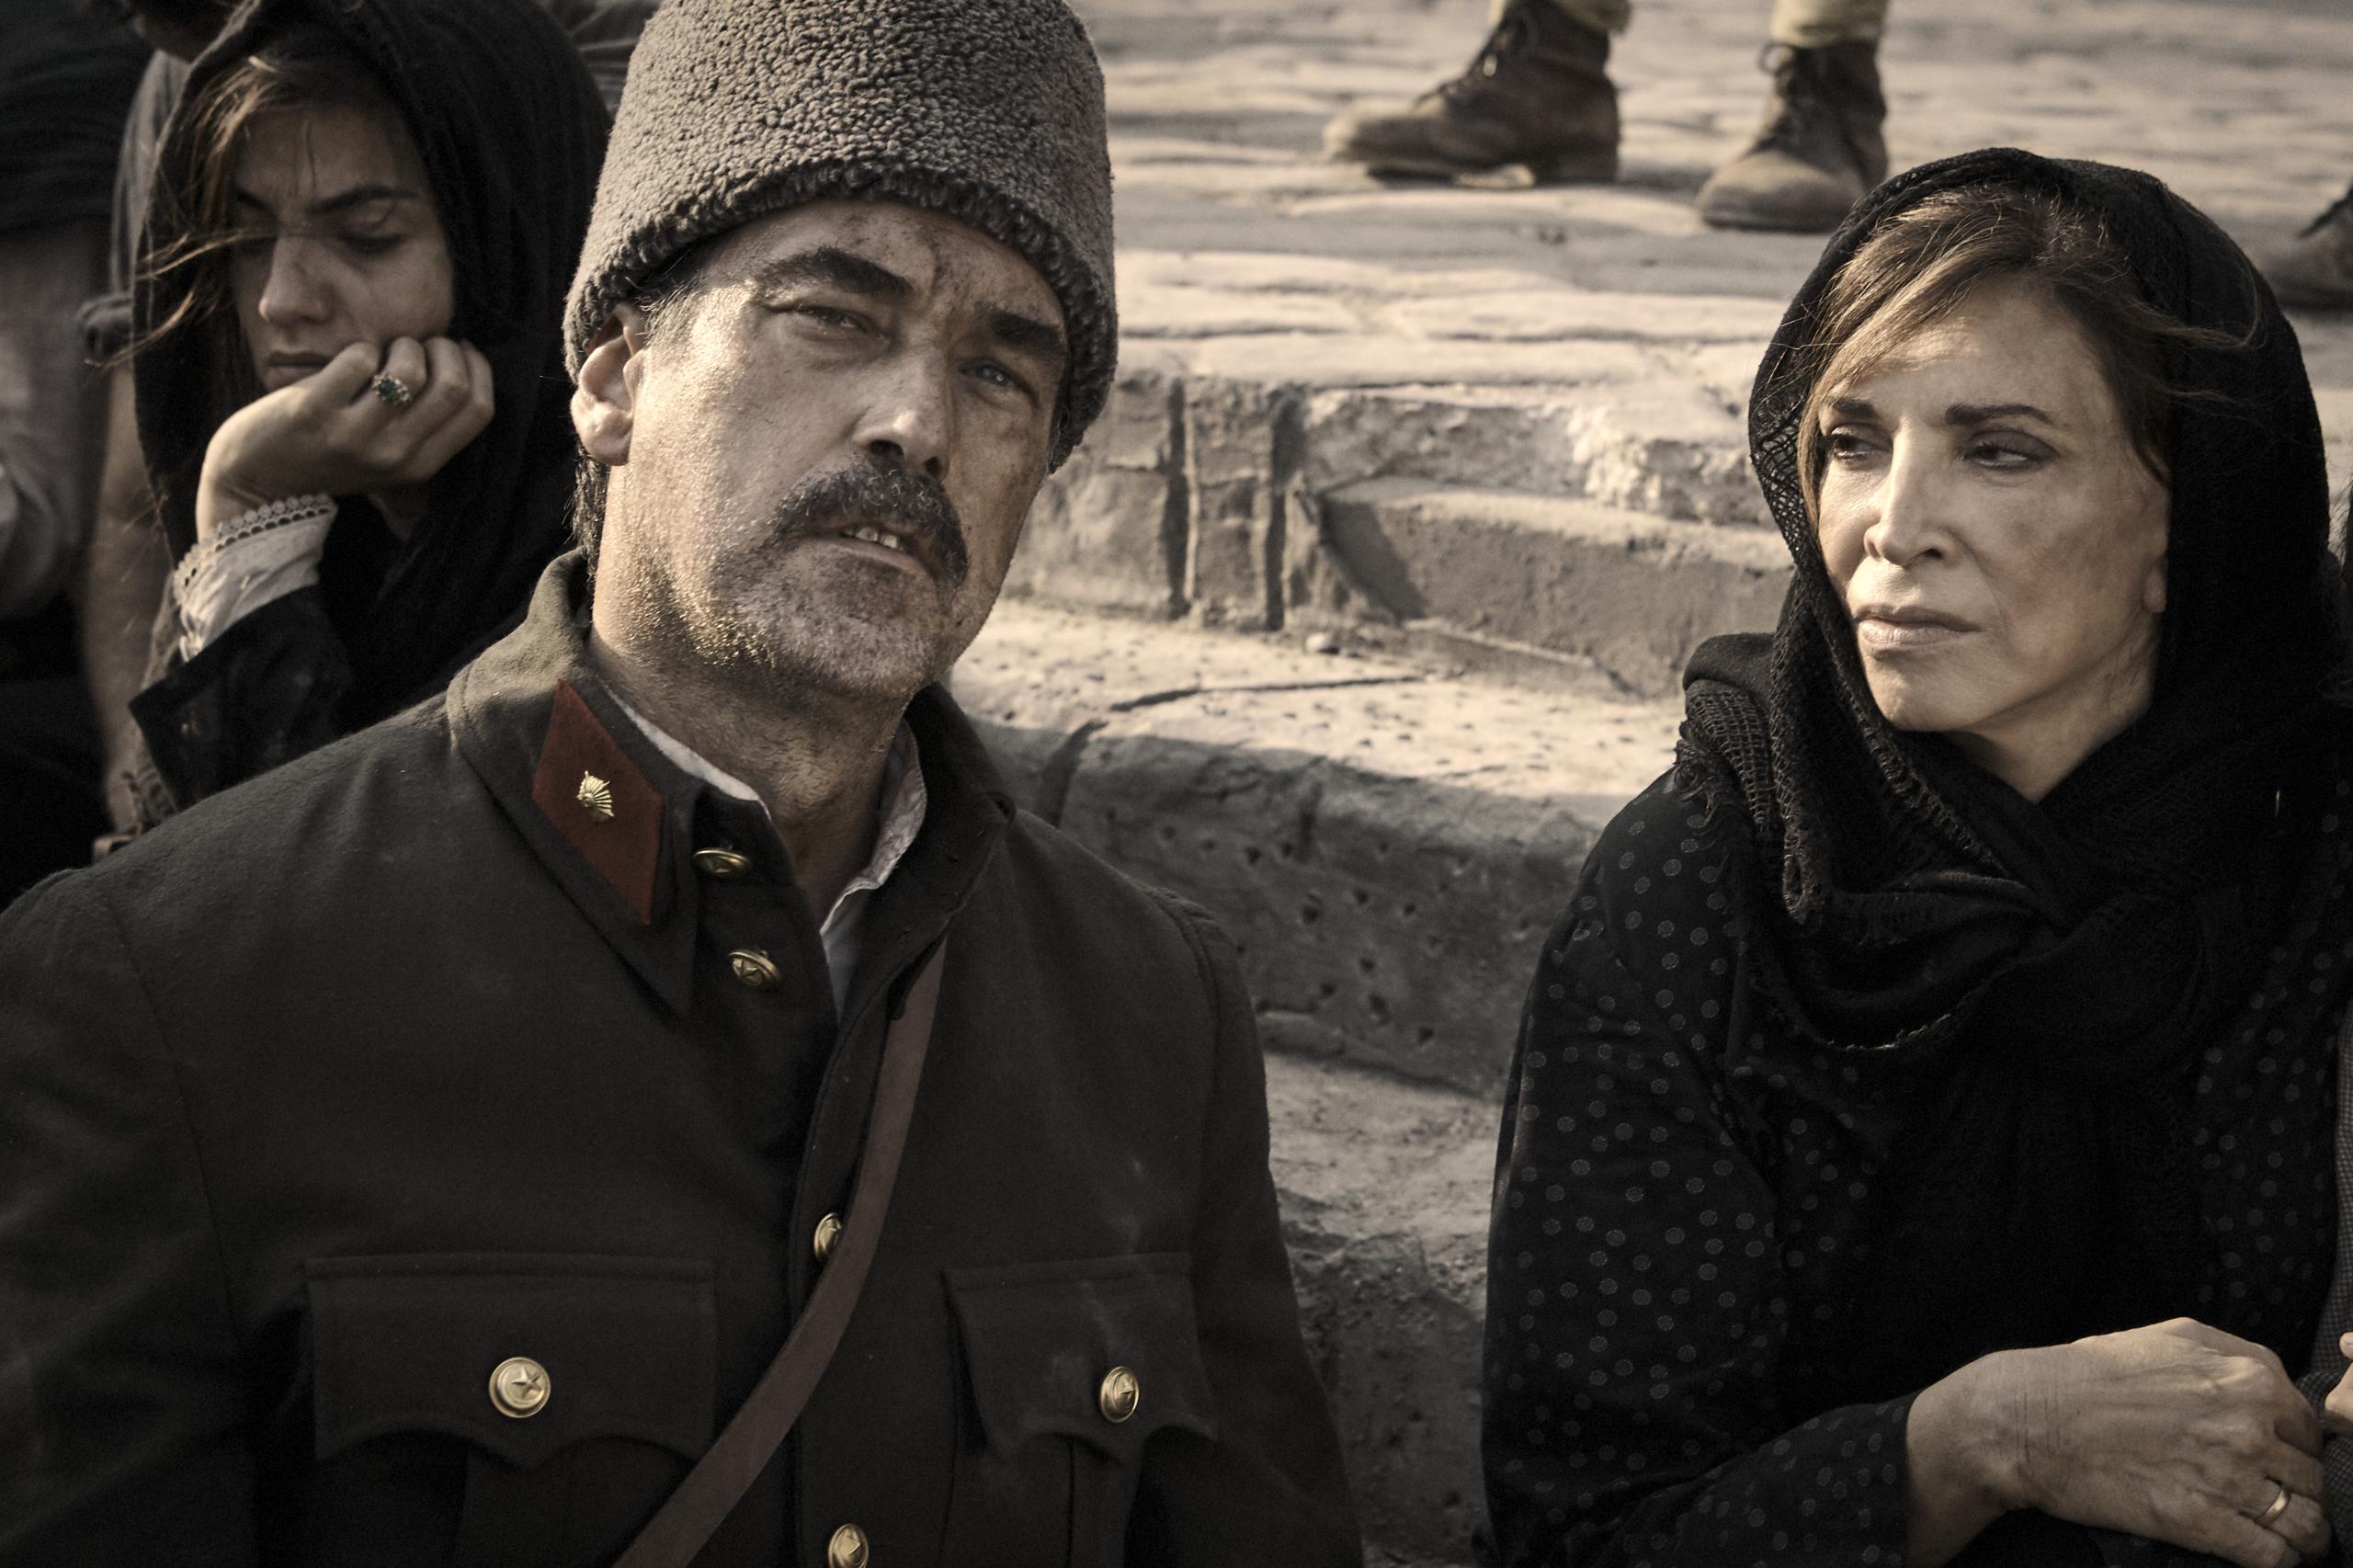 A man in military dress and a woman in a dark dress and black headscarf are sitting on stone steps with serious expressions.